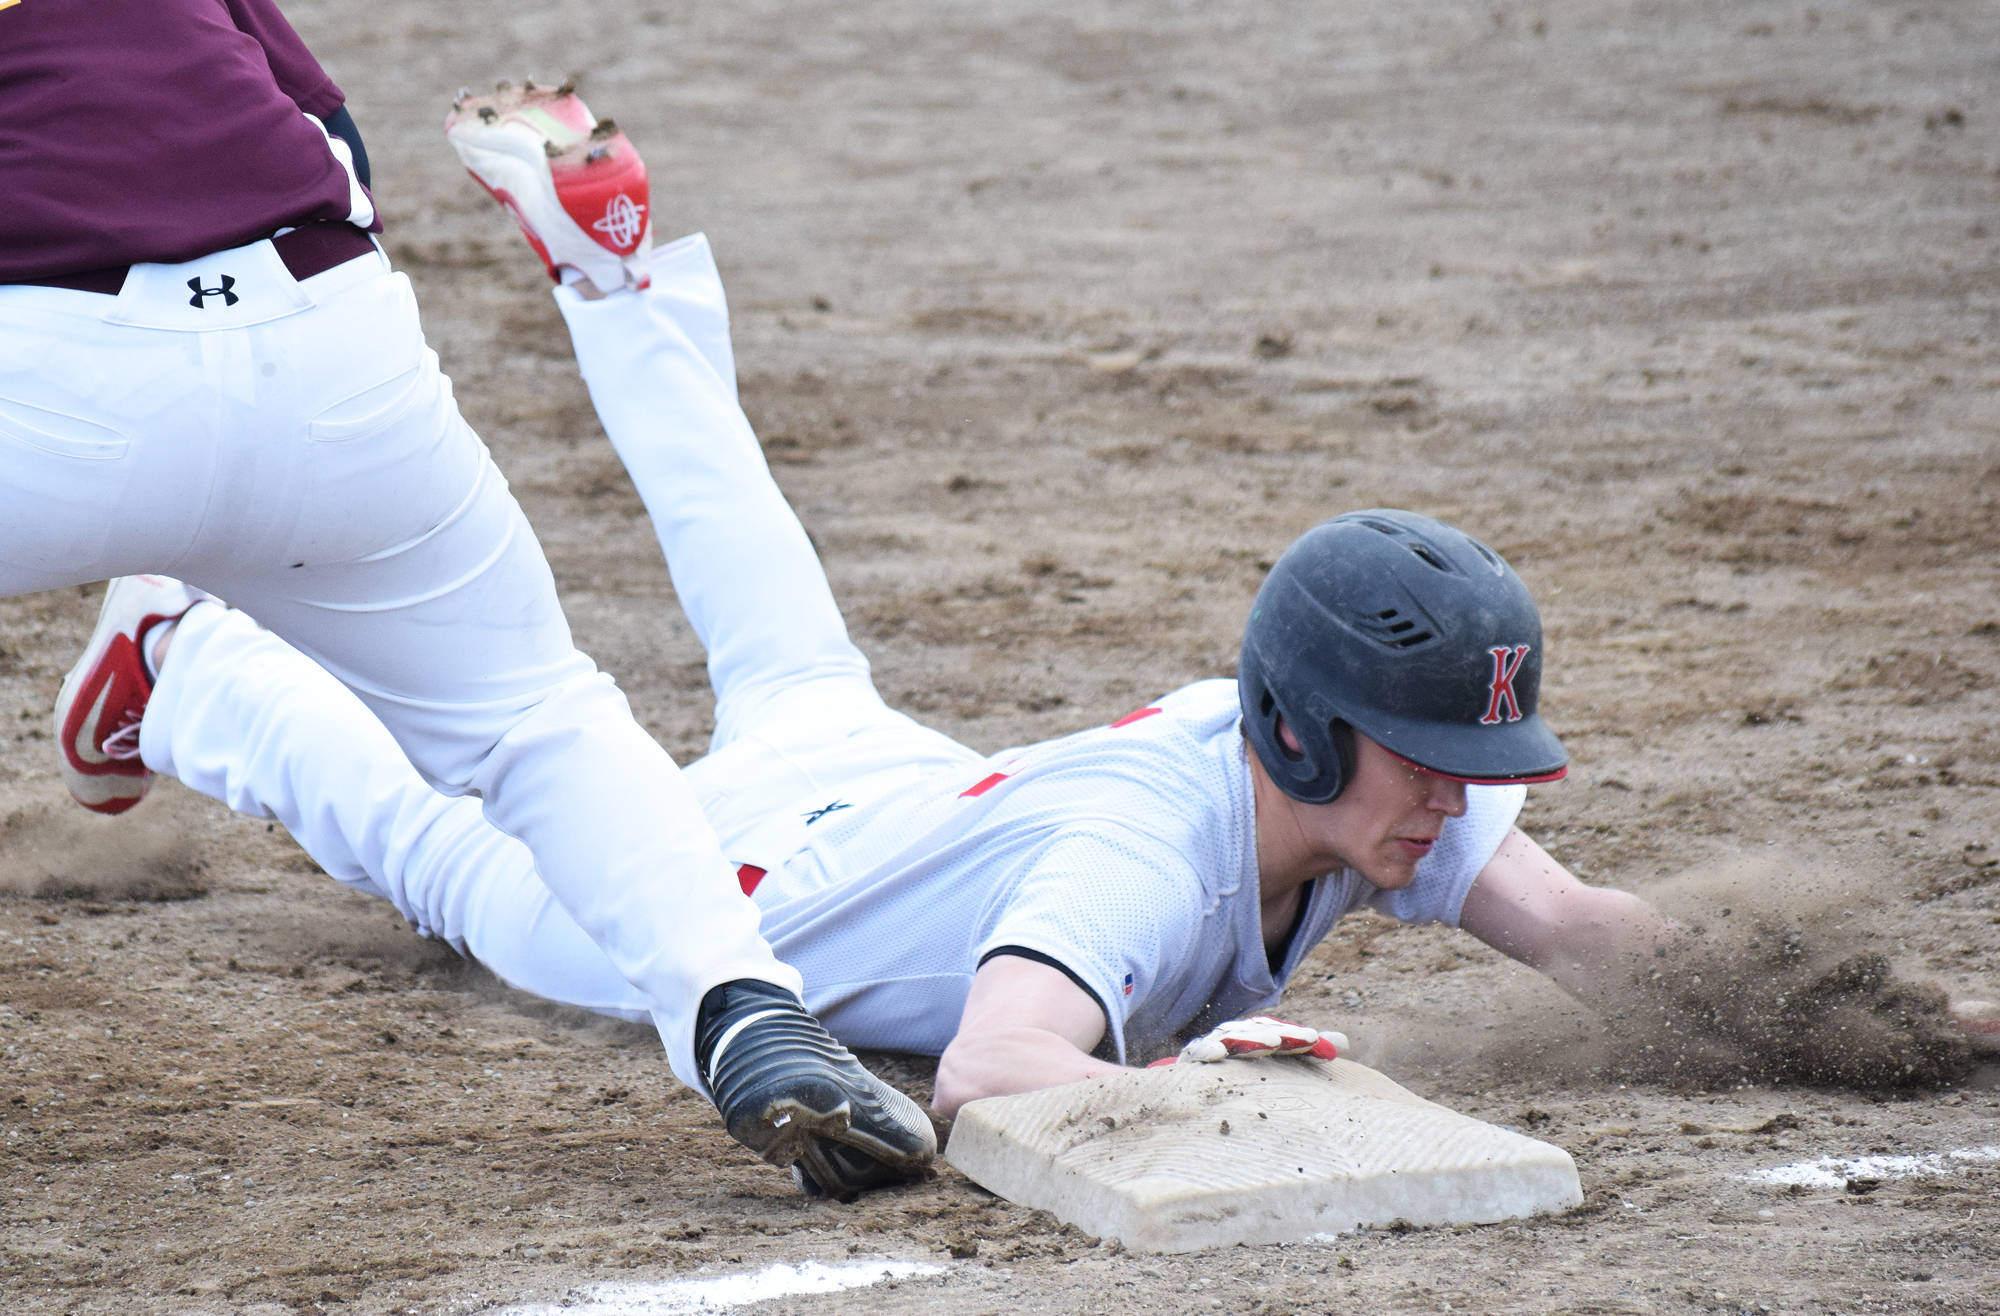 Kenai Central’s Ryan Johnson tags up to first base under Grace Christian’s Steven Brown, Friday evening at the Kenai Little League Fields. (Photo by Joey Klecka/Peninsula Clarion)